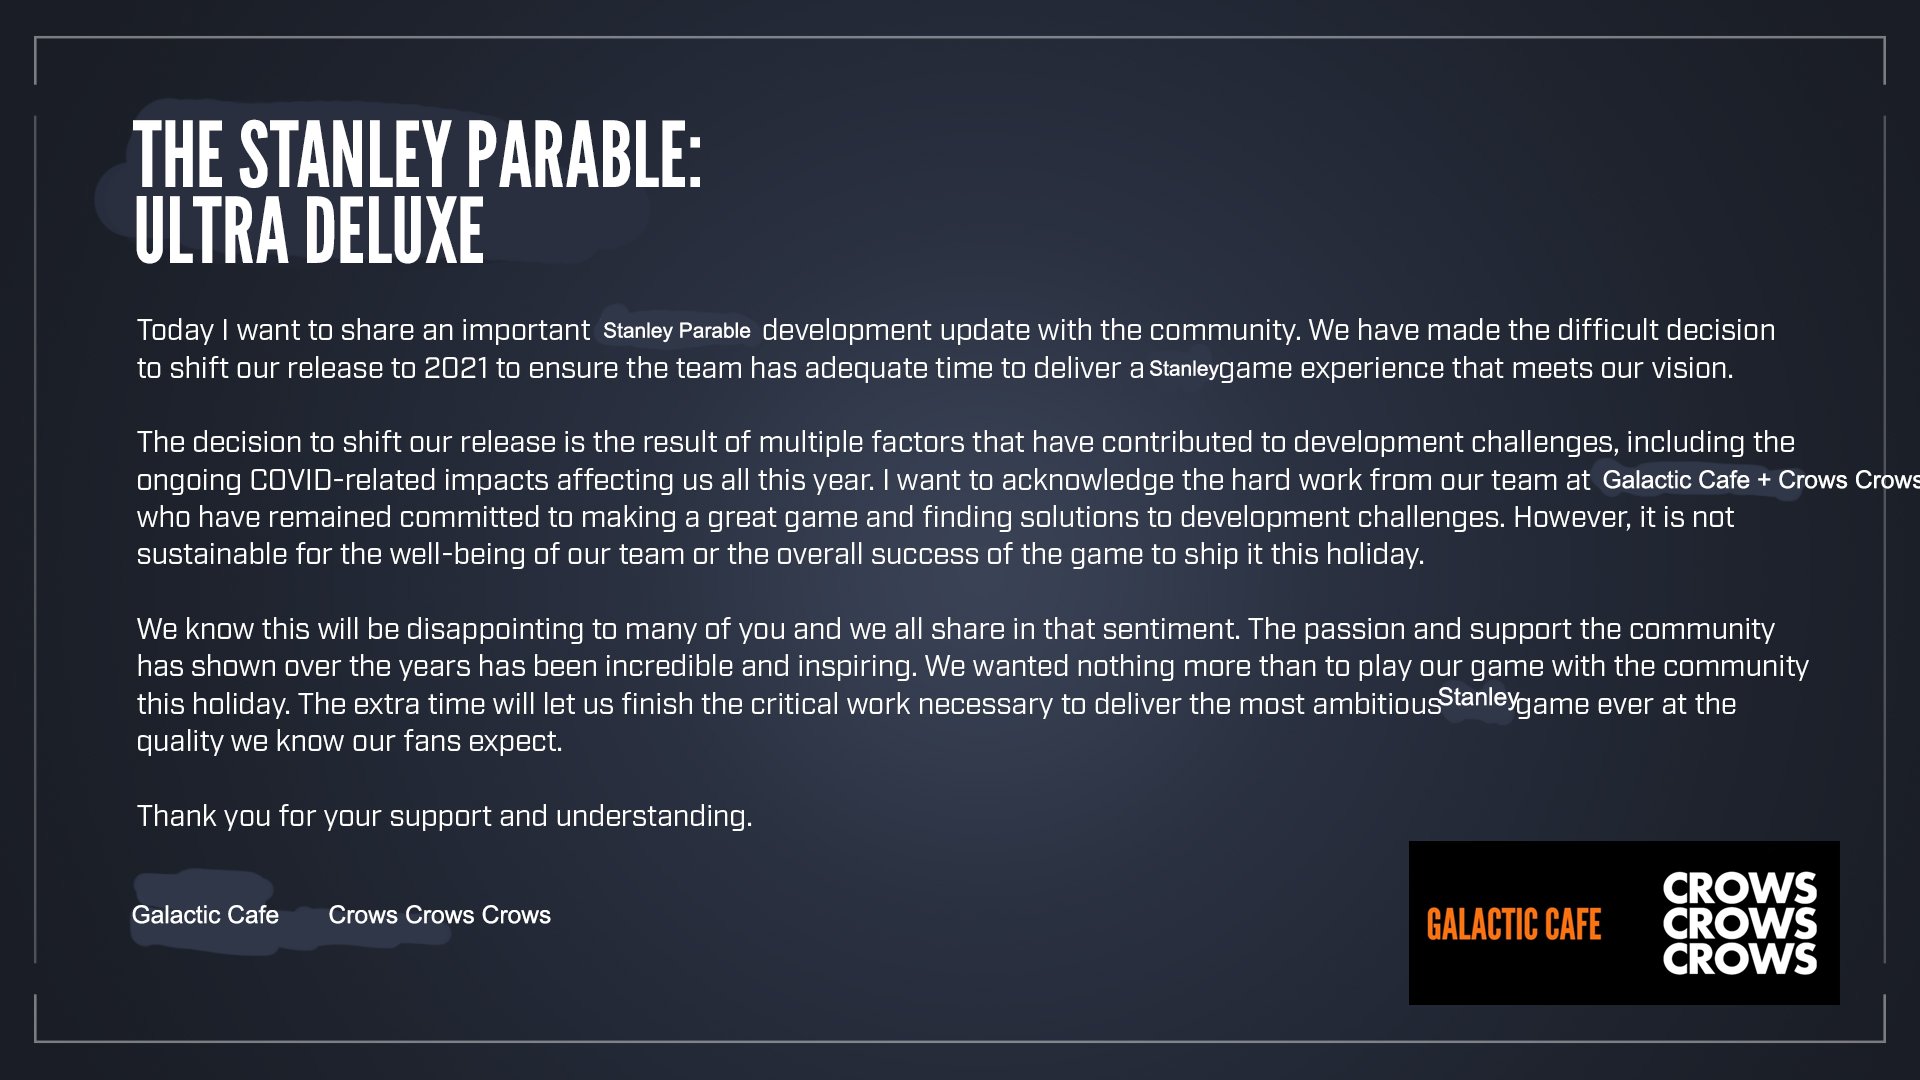 Stanley parable deluxe концовки. The Stanley Parable: Ultra Deluxe. The Stanley Parable Ultra Deluxe Stanley. E Stanley Parable Ultra Deluxe. The Stanley Parable 2: Ultra Deluxe.